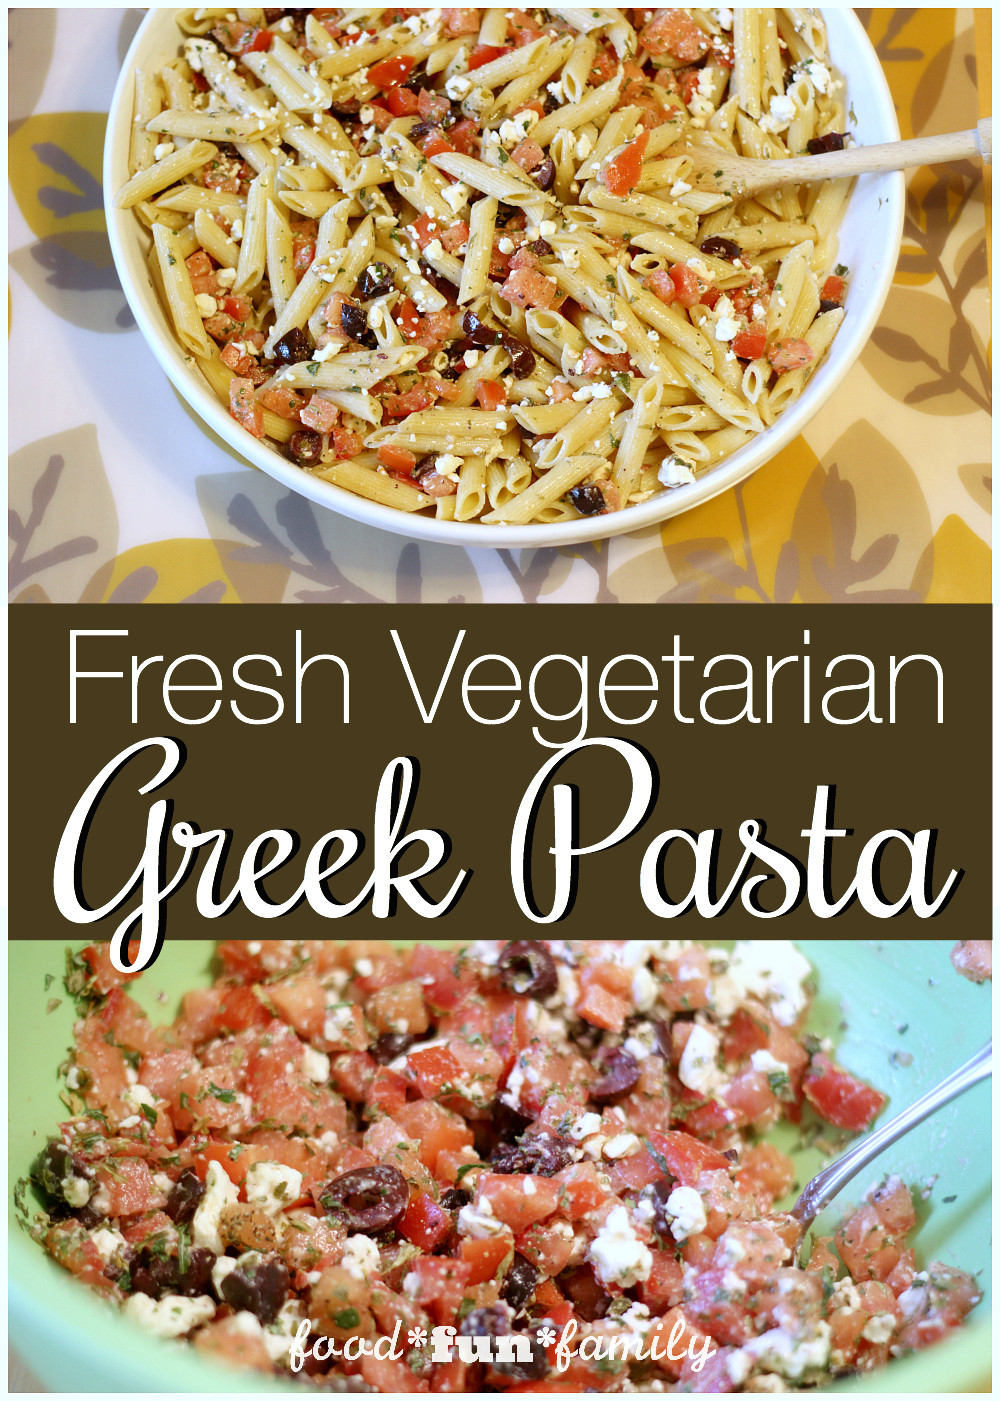 Fresh Vegetarian Greek Pasta from Food Fun Family - a quick dish that can be enjoyed hot or cold! This is a quick meal to prapre on nights when you don't want to heat up the kitchen.